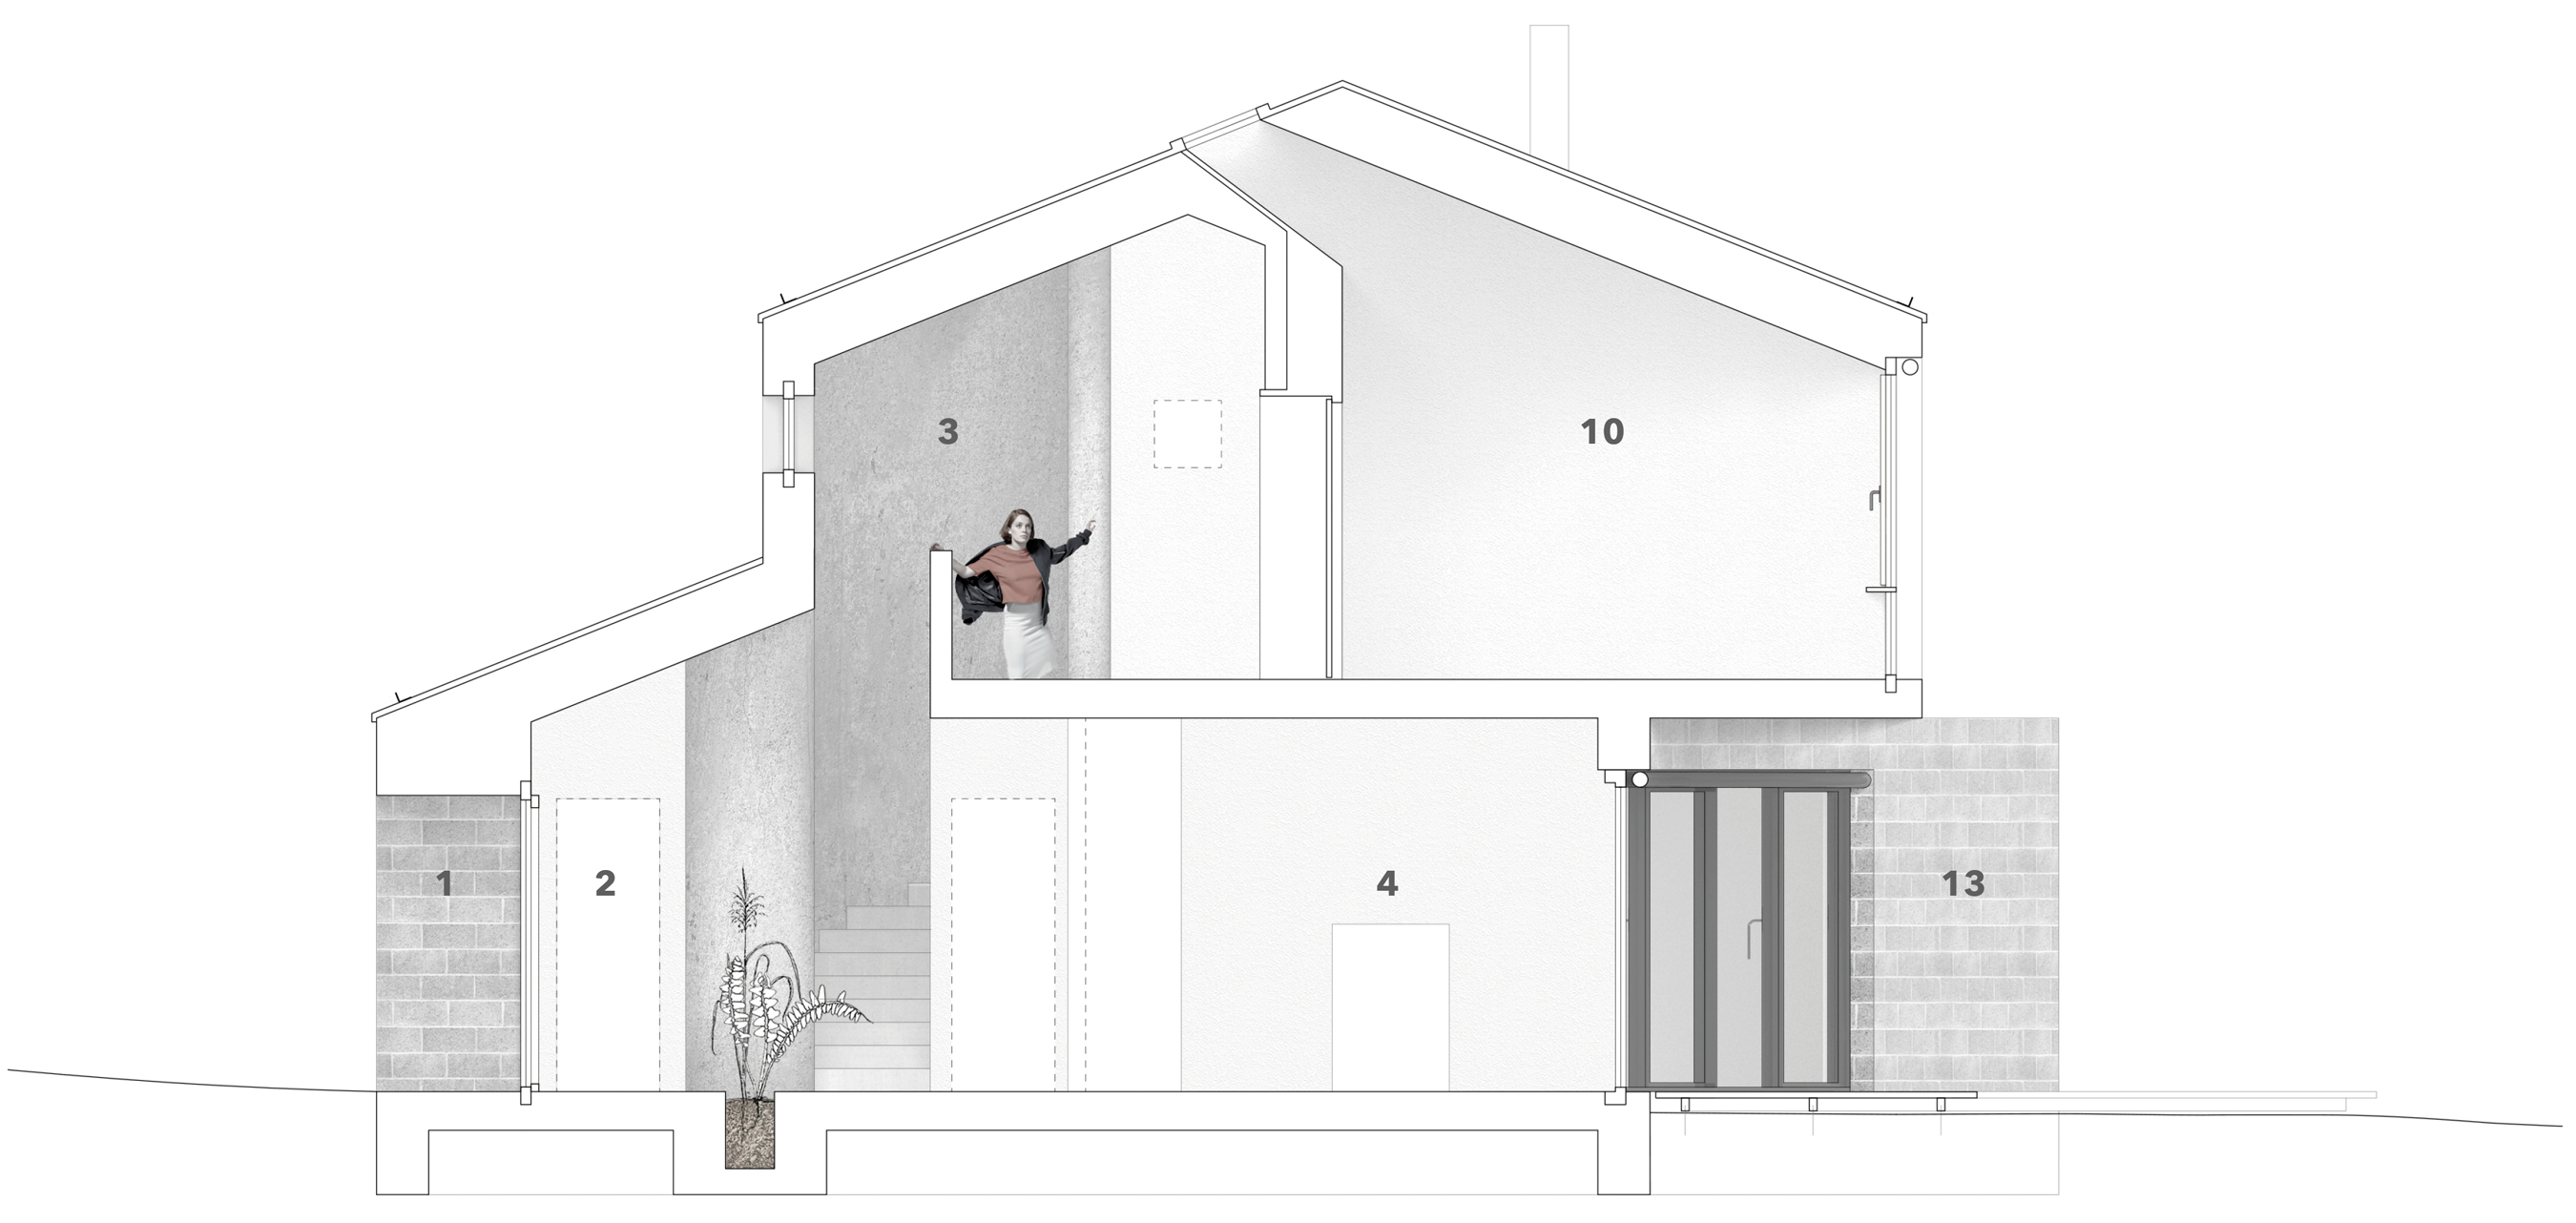 cross Section & materiality: 1 - main entrance, 2 - Cloak room, 3 - Hallway with stairs, 4 - kitchen,  10 - master bedroom, 13 - garden terrace